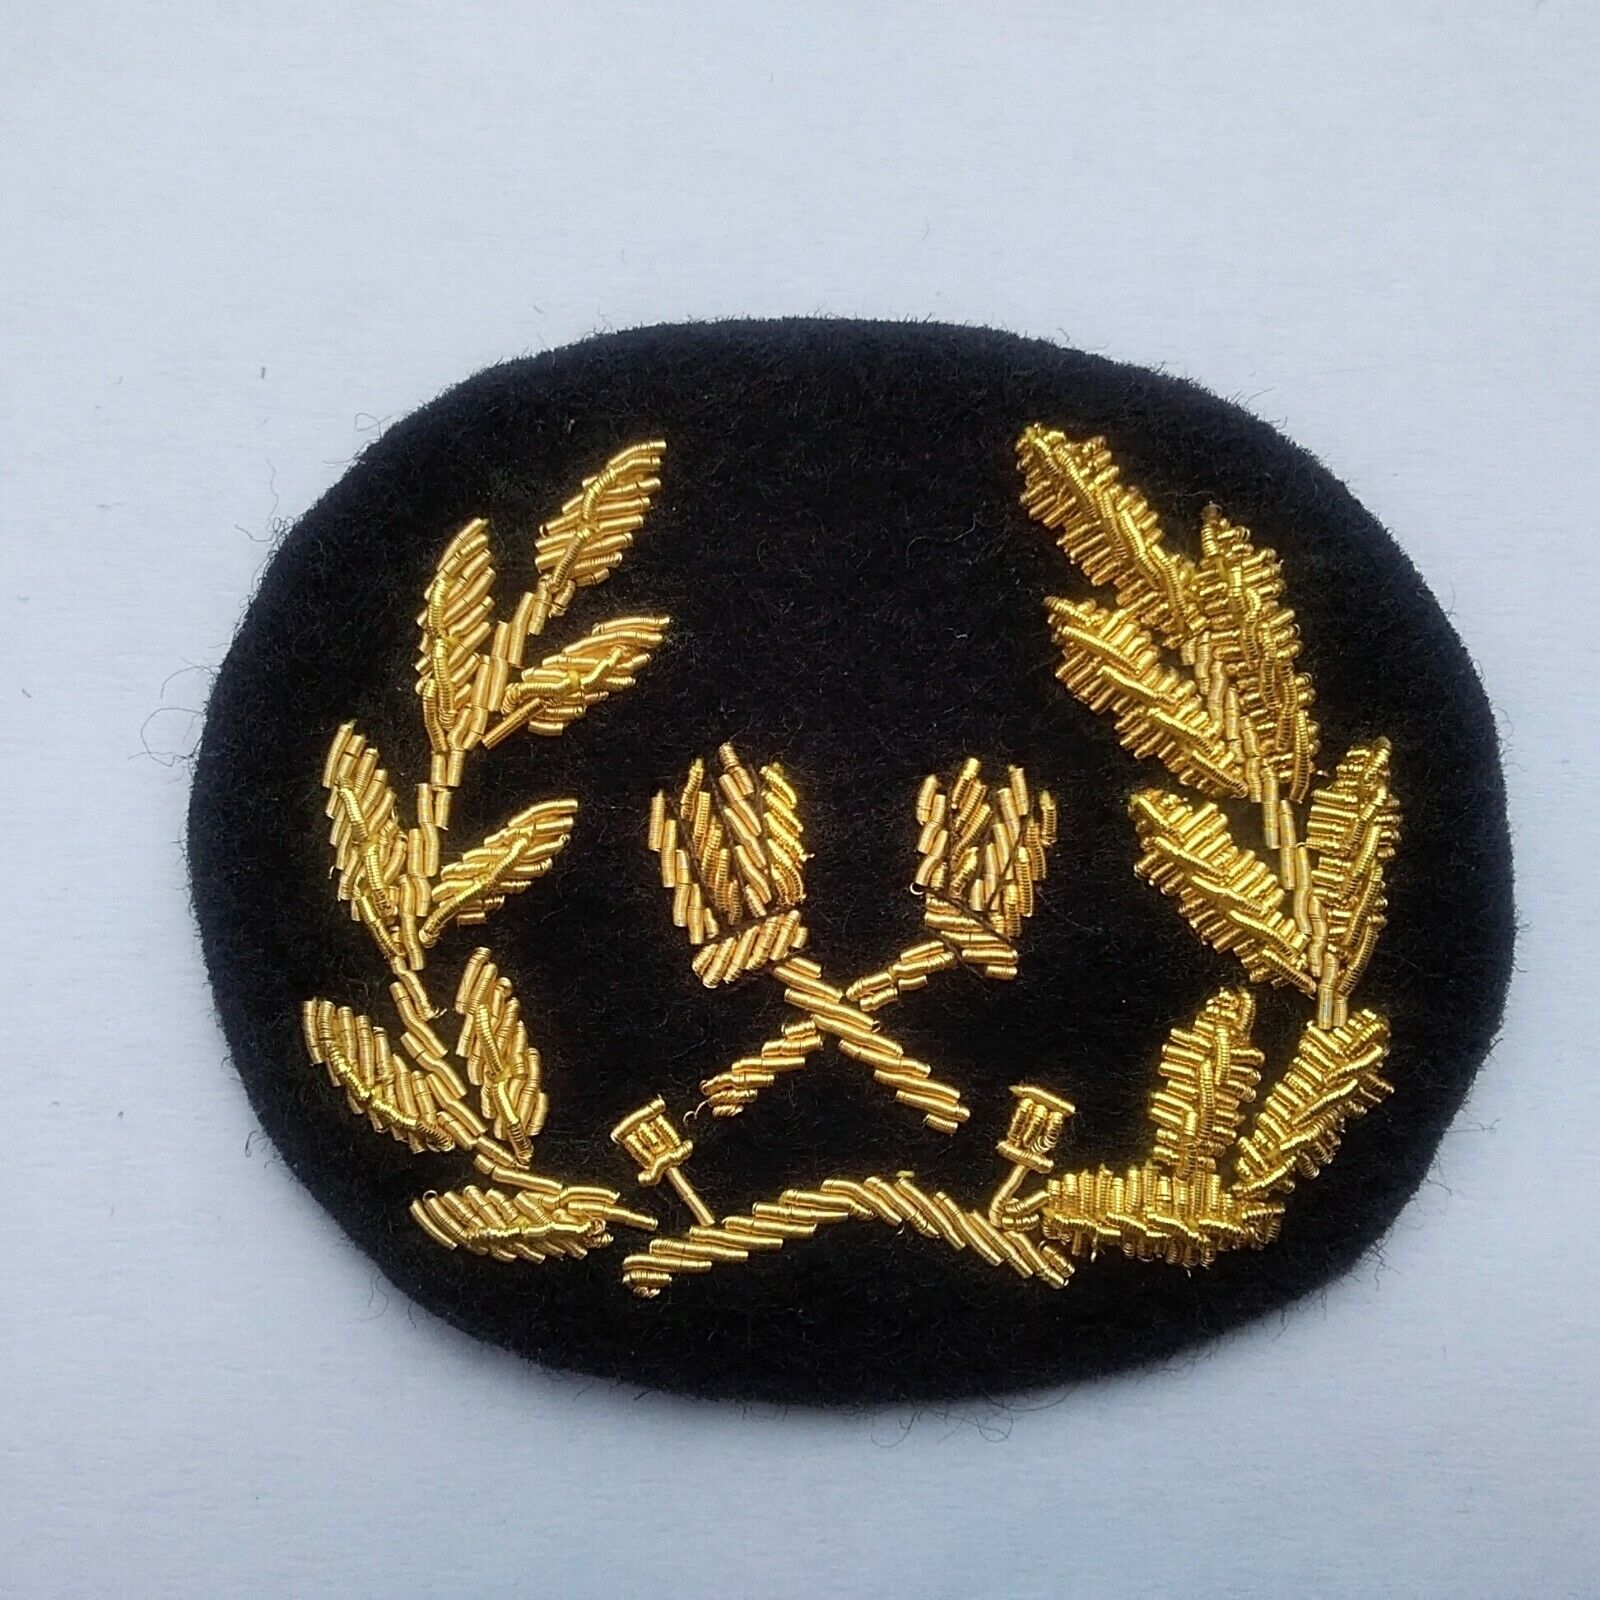 FRENCH NAVY ESSENCES - FUEL - TANKERS  OFFICERS CAP BADGE. 